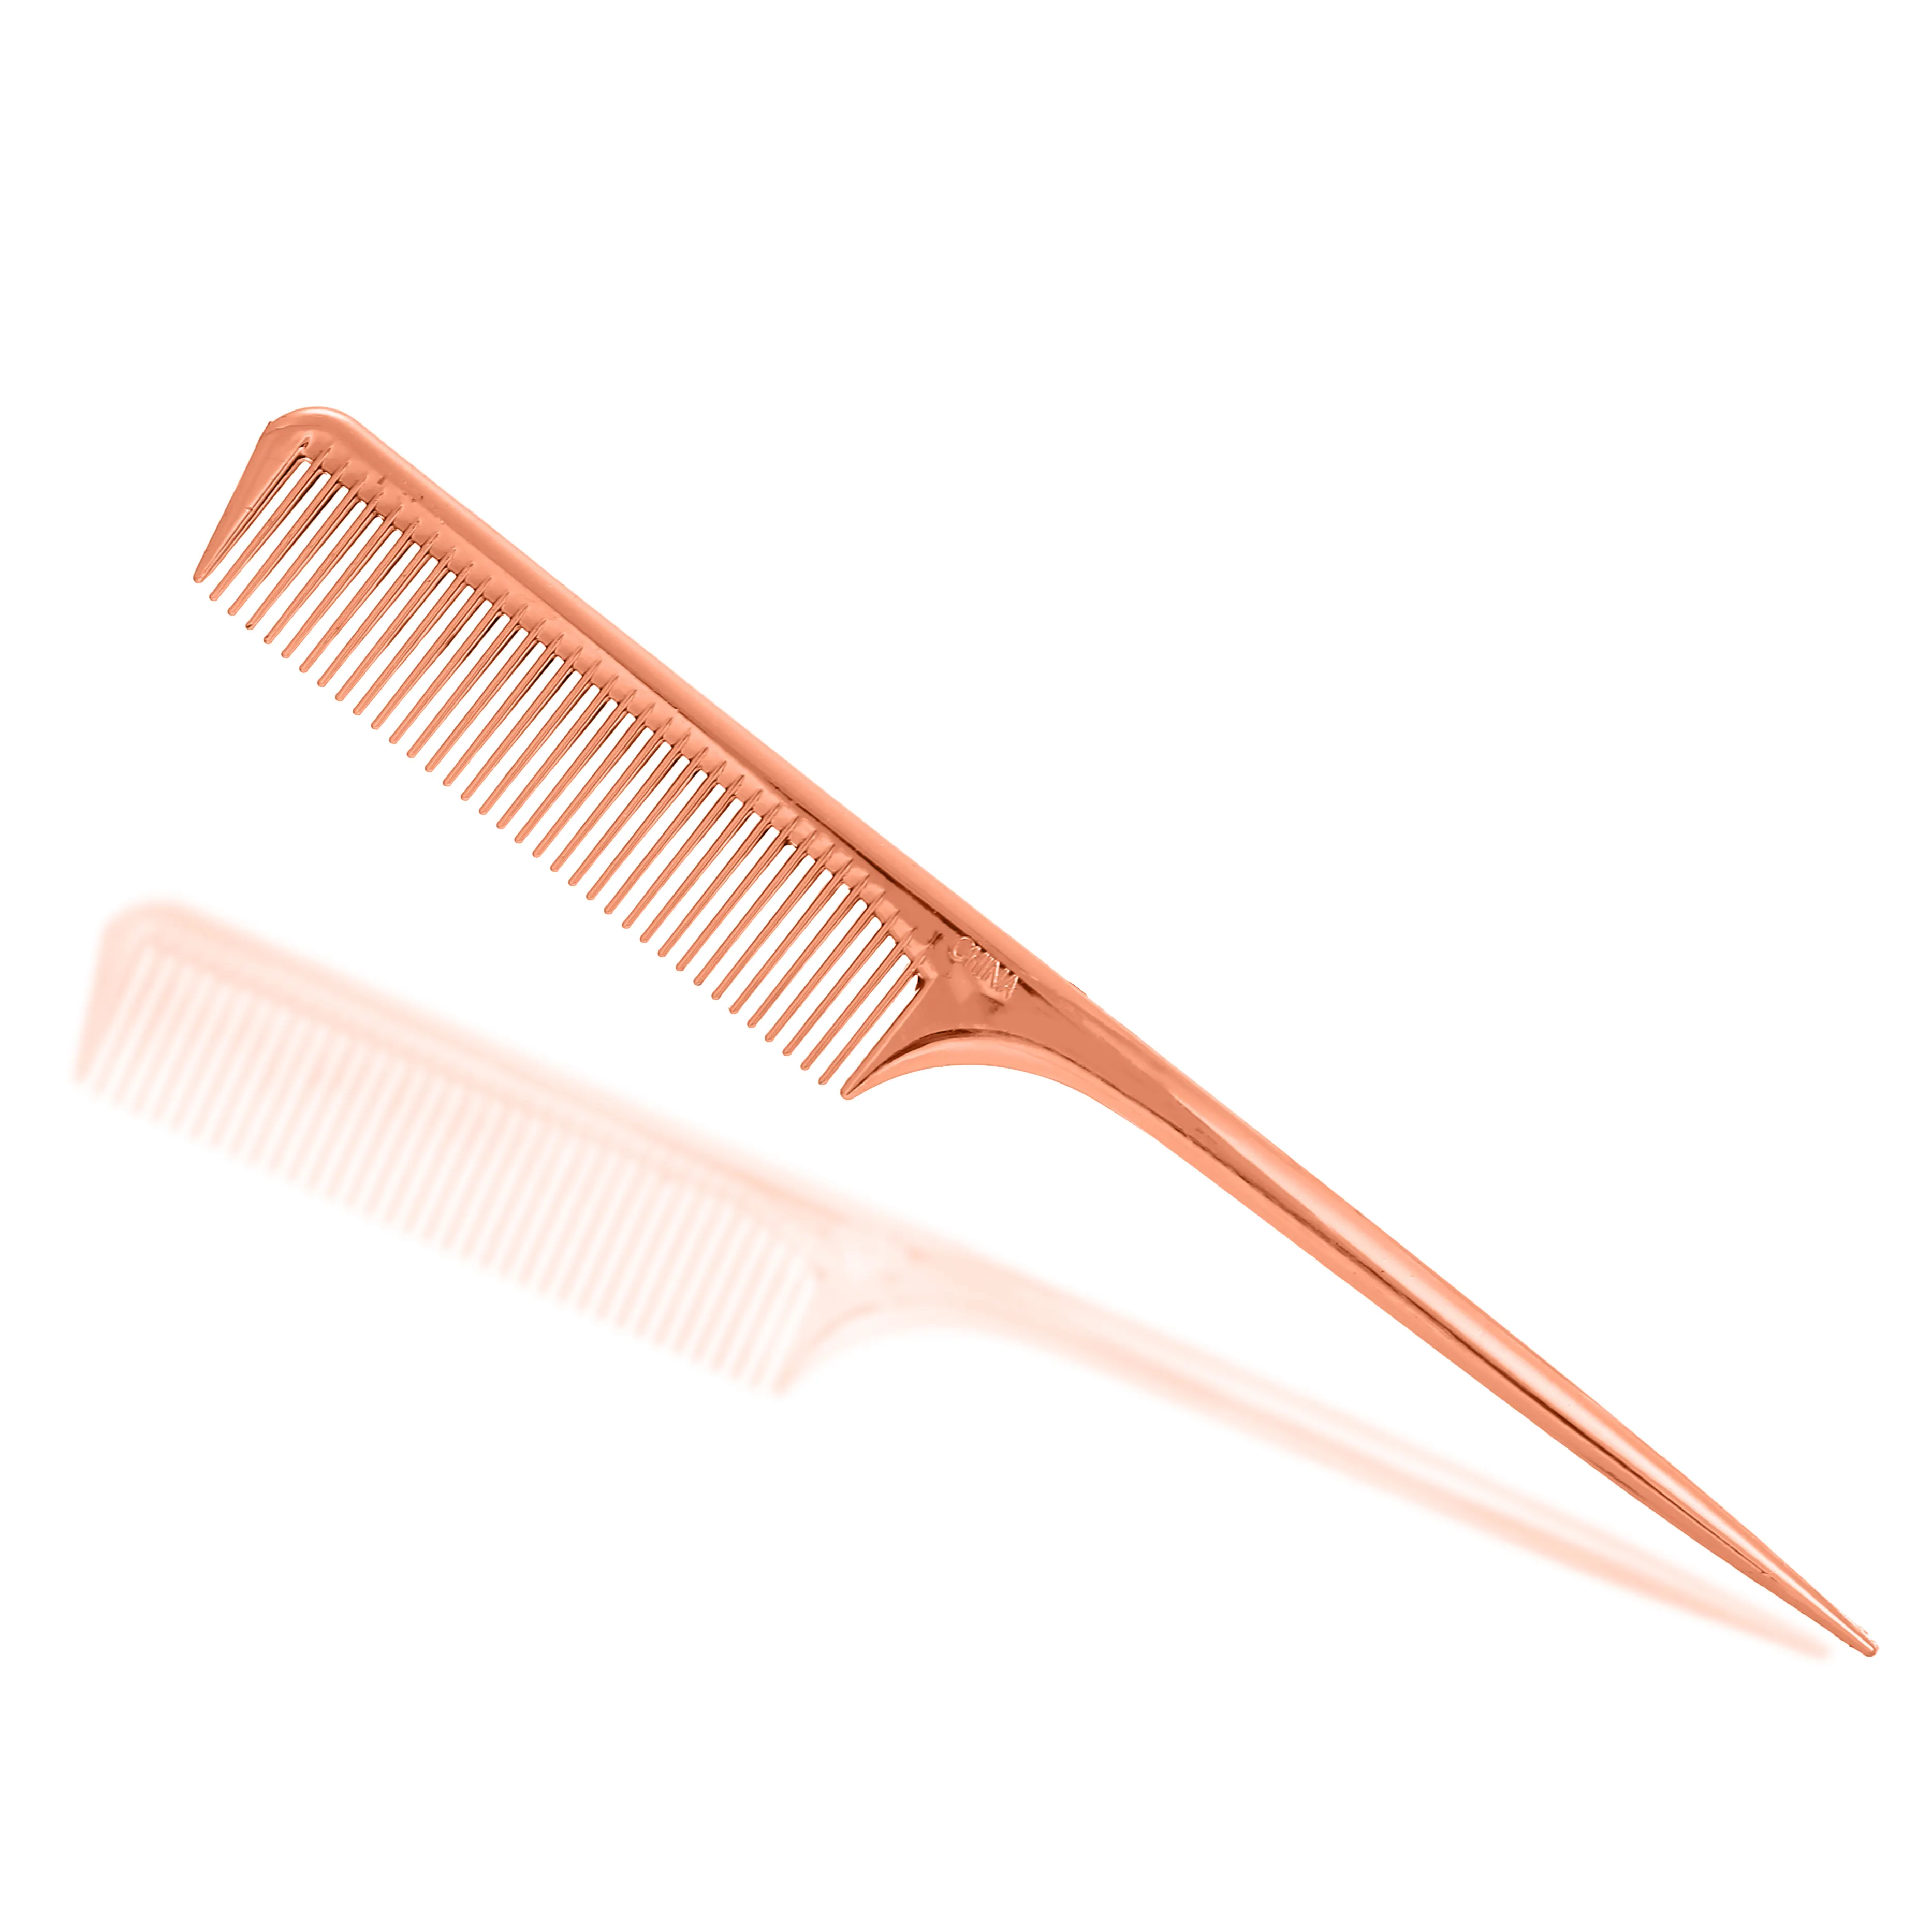 Logotipo Personalizável Rose Gold Tail Comb Plastic Rat Tail Comb Bulk Hair Styling Pente